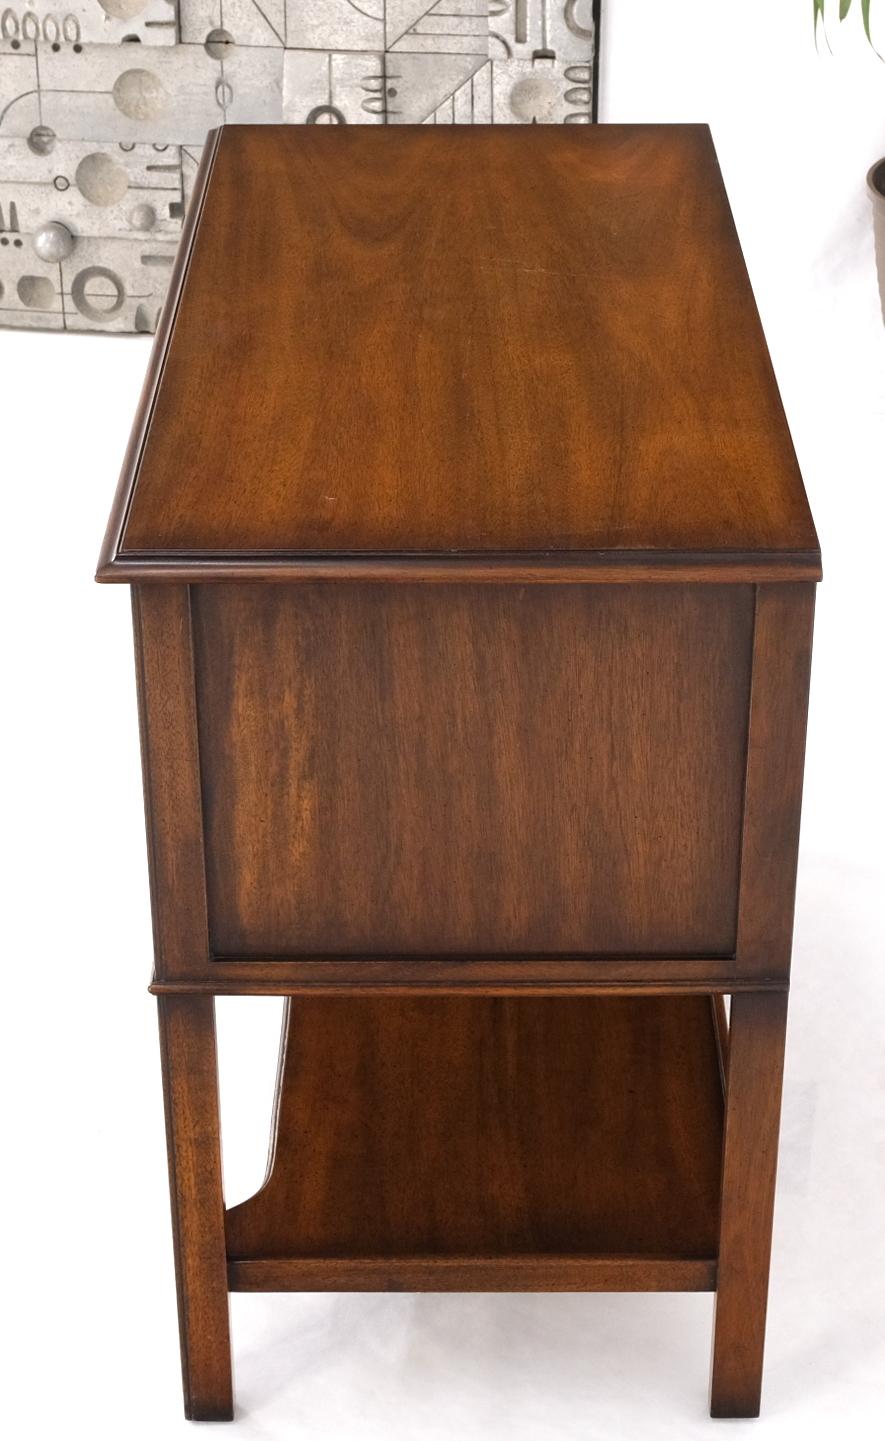 Mahogany Brass Hardware Kindel Entry Hall Chest Console Table Buffet Cabinet 4